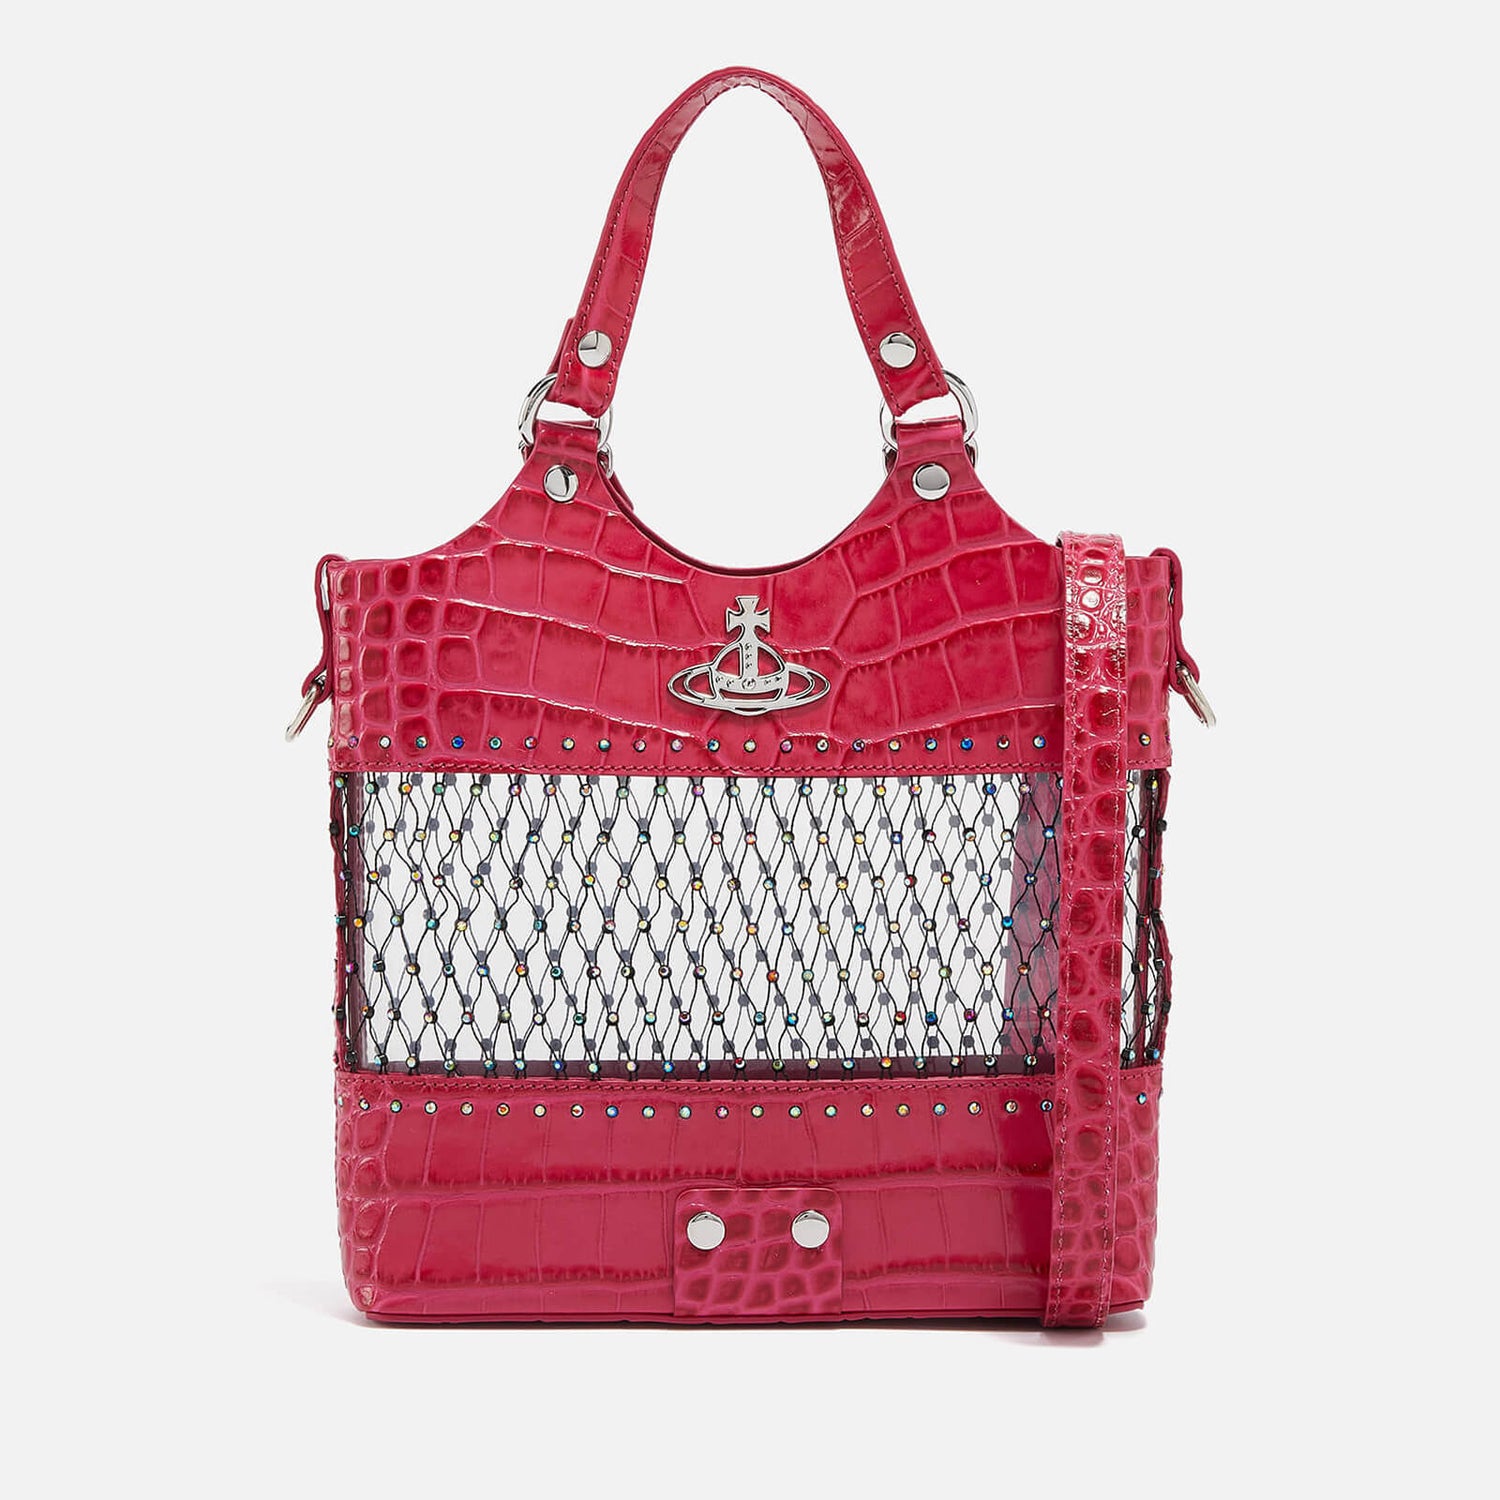 Vivienne Westwood Roxy Embellished Mesh and Leather Tote Bag